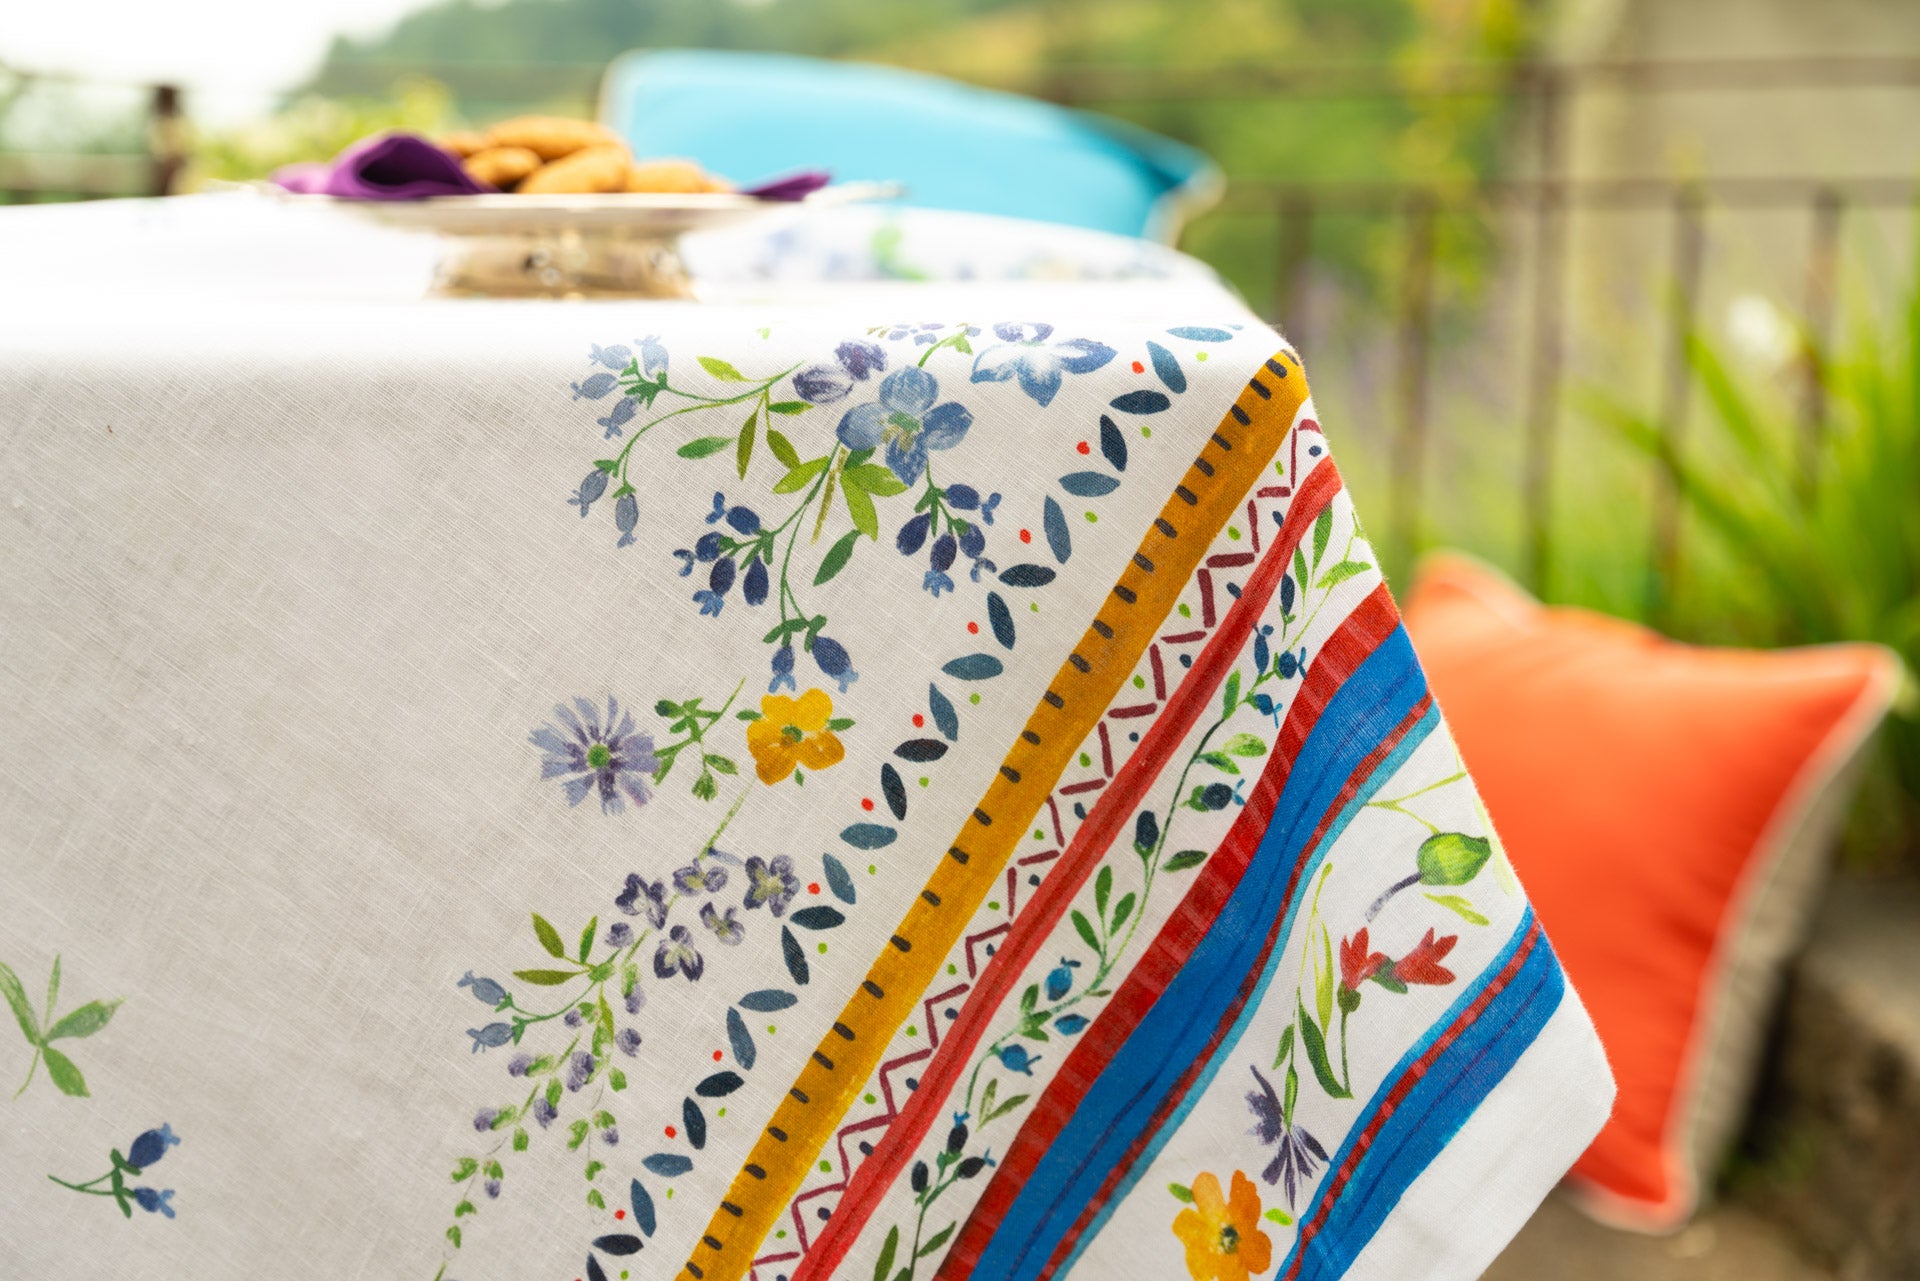 Tessitura Toscana Telerie, “Primula”, Pure linen printed table runner.